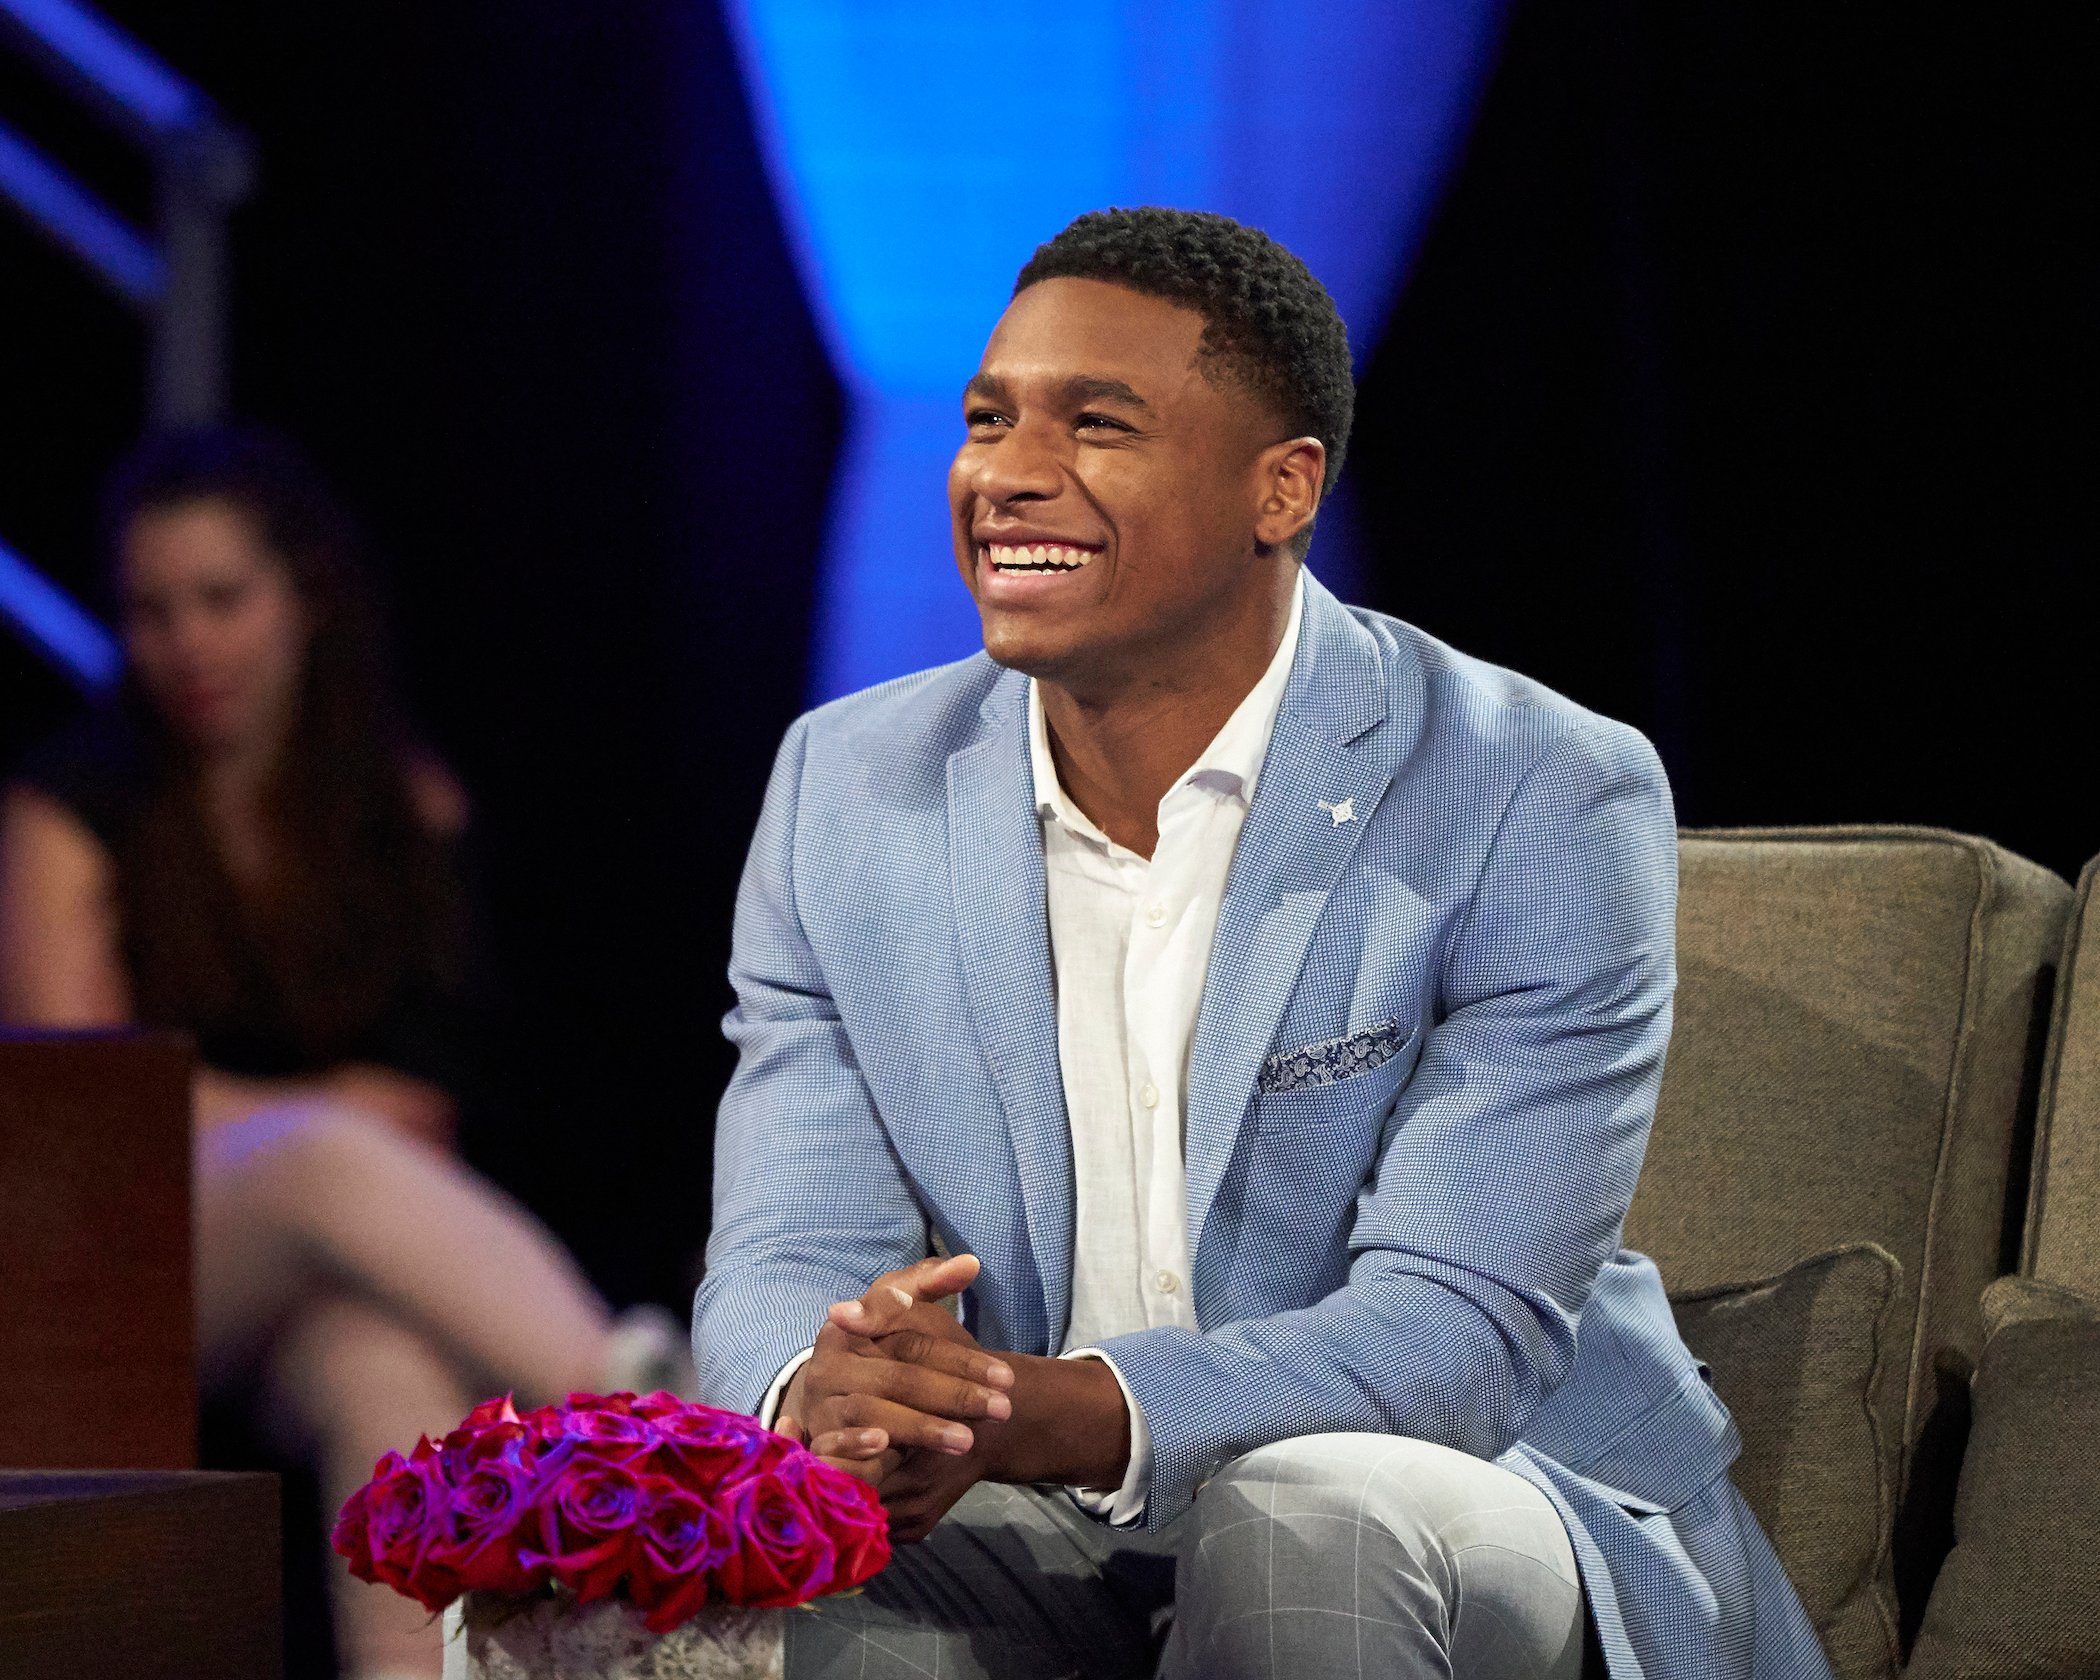 Andrew Spencer, a possible 'Bachelor in Paradise' Season 8 cast member, smiling and laughing on stage during the 'Men Tell All' for 'The Bachelorette'